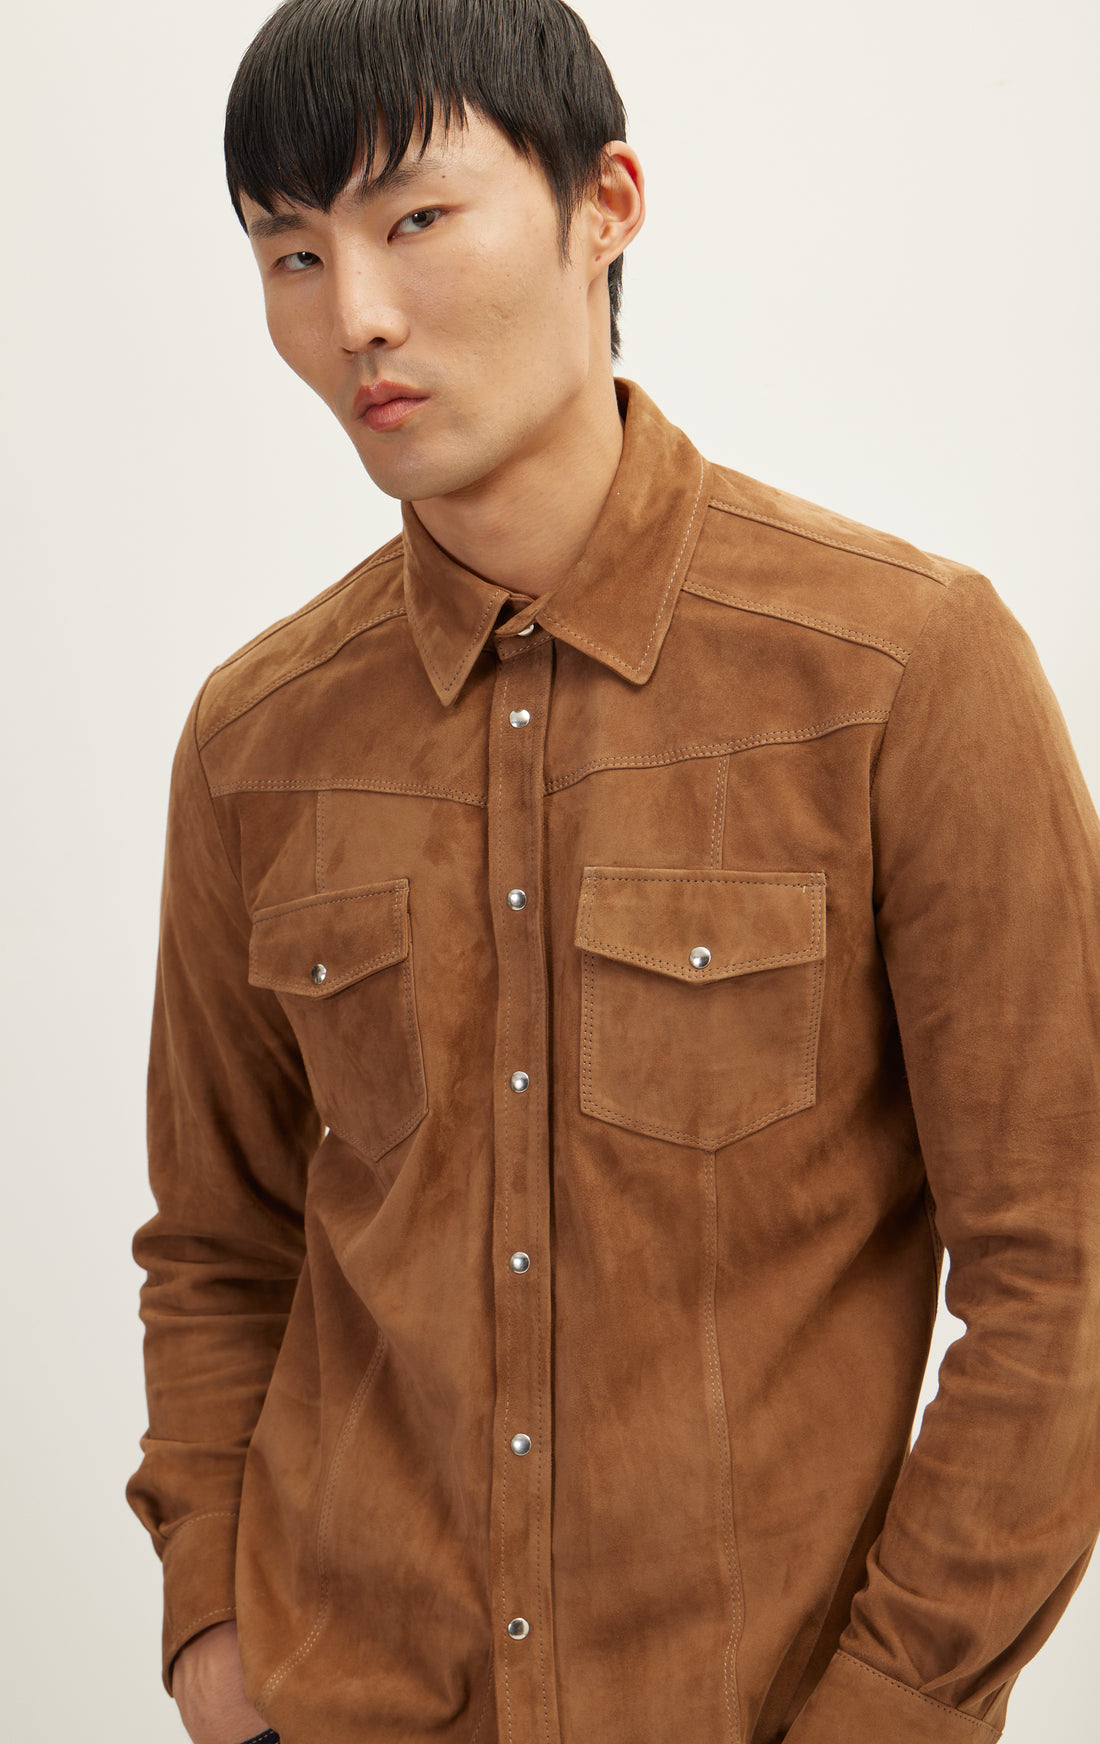 N° 4725S SUEDE LEATHER SHIRT - CAMEL